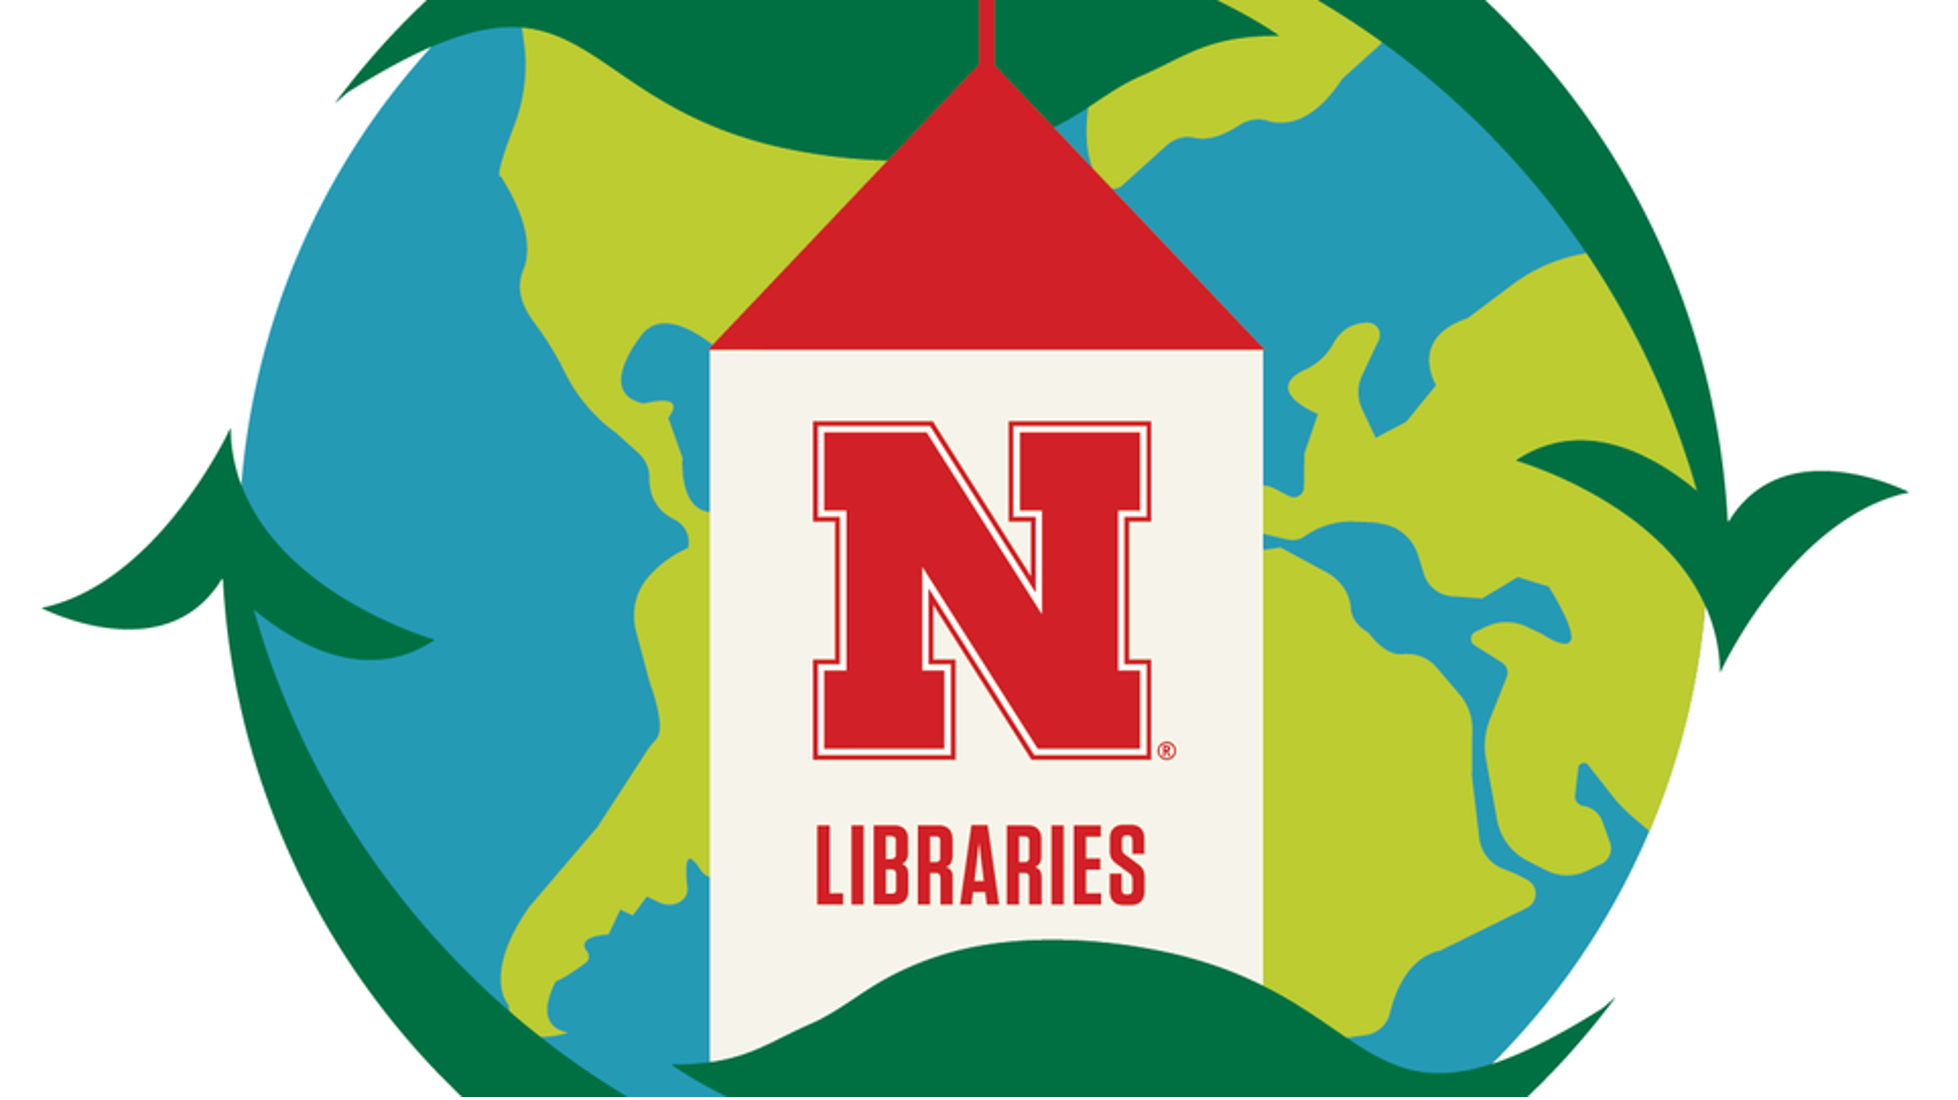 A logo of University Libraries and a graphic design of a globe.